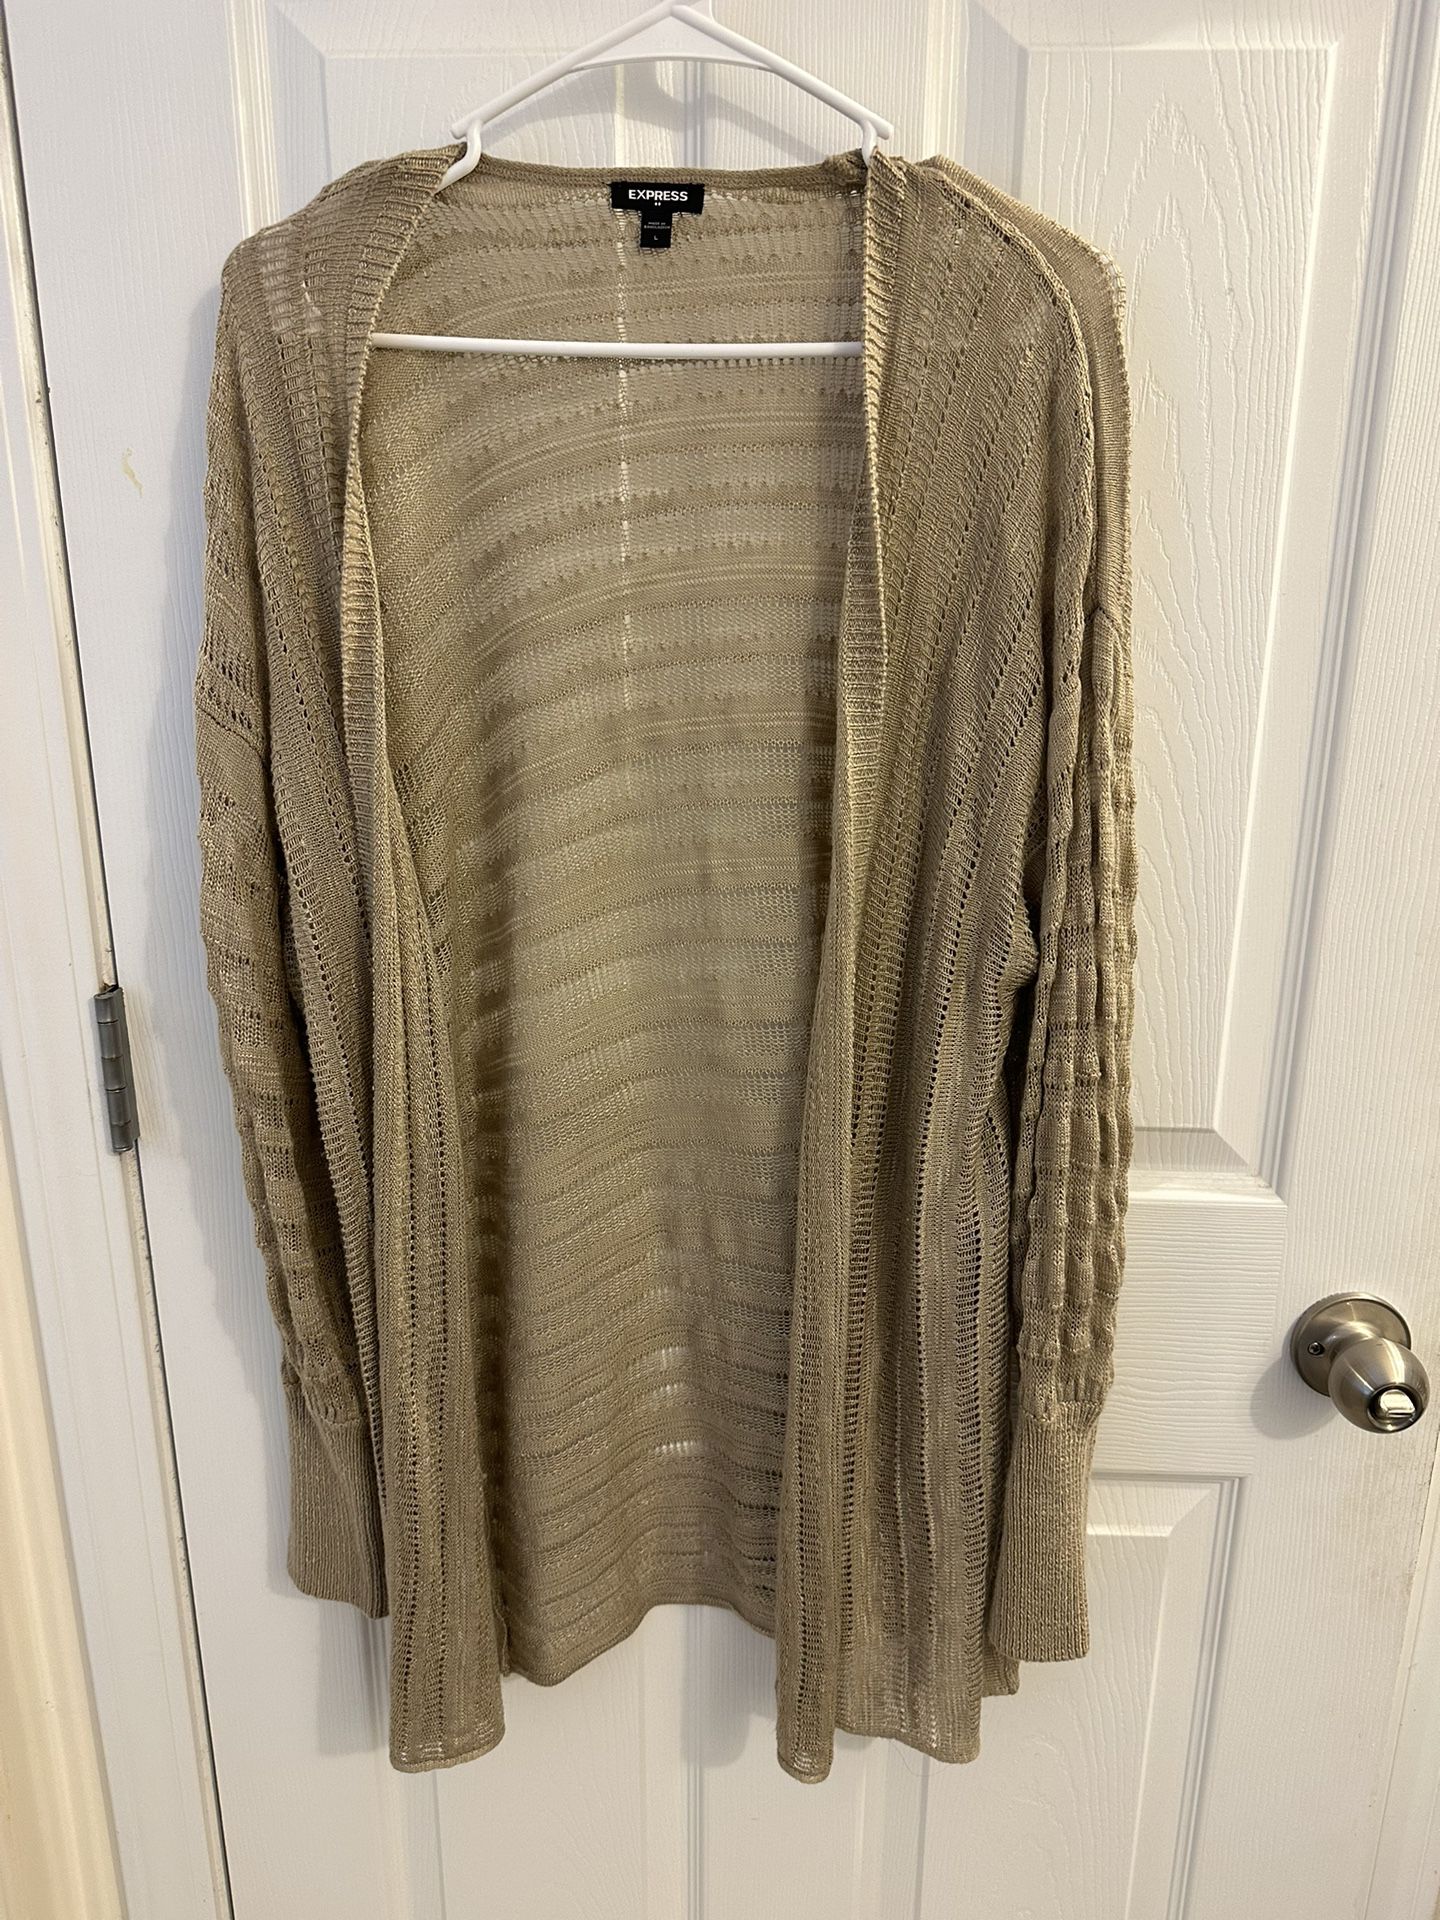 Express Knit Long Sleeved Duster 